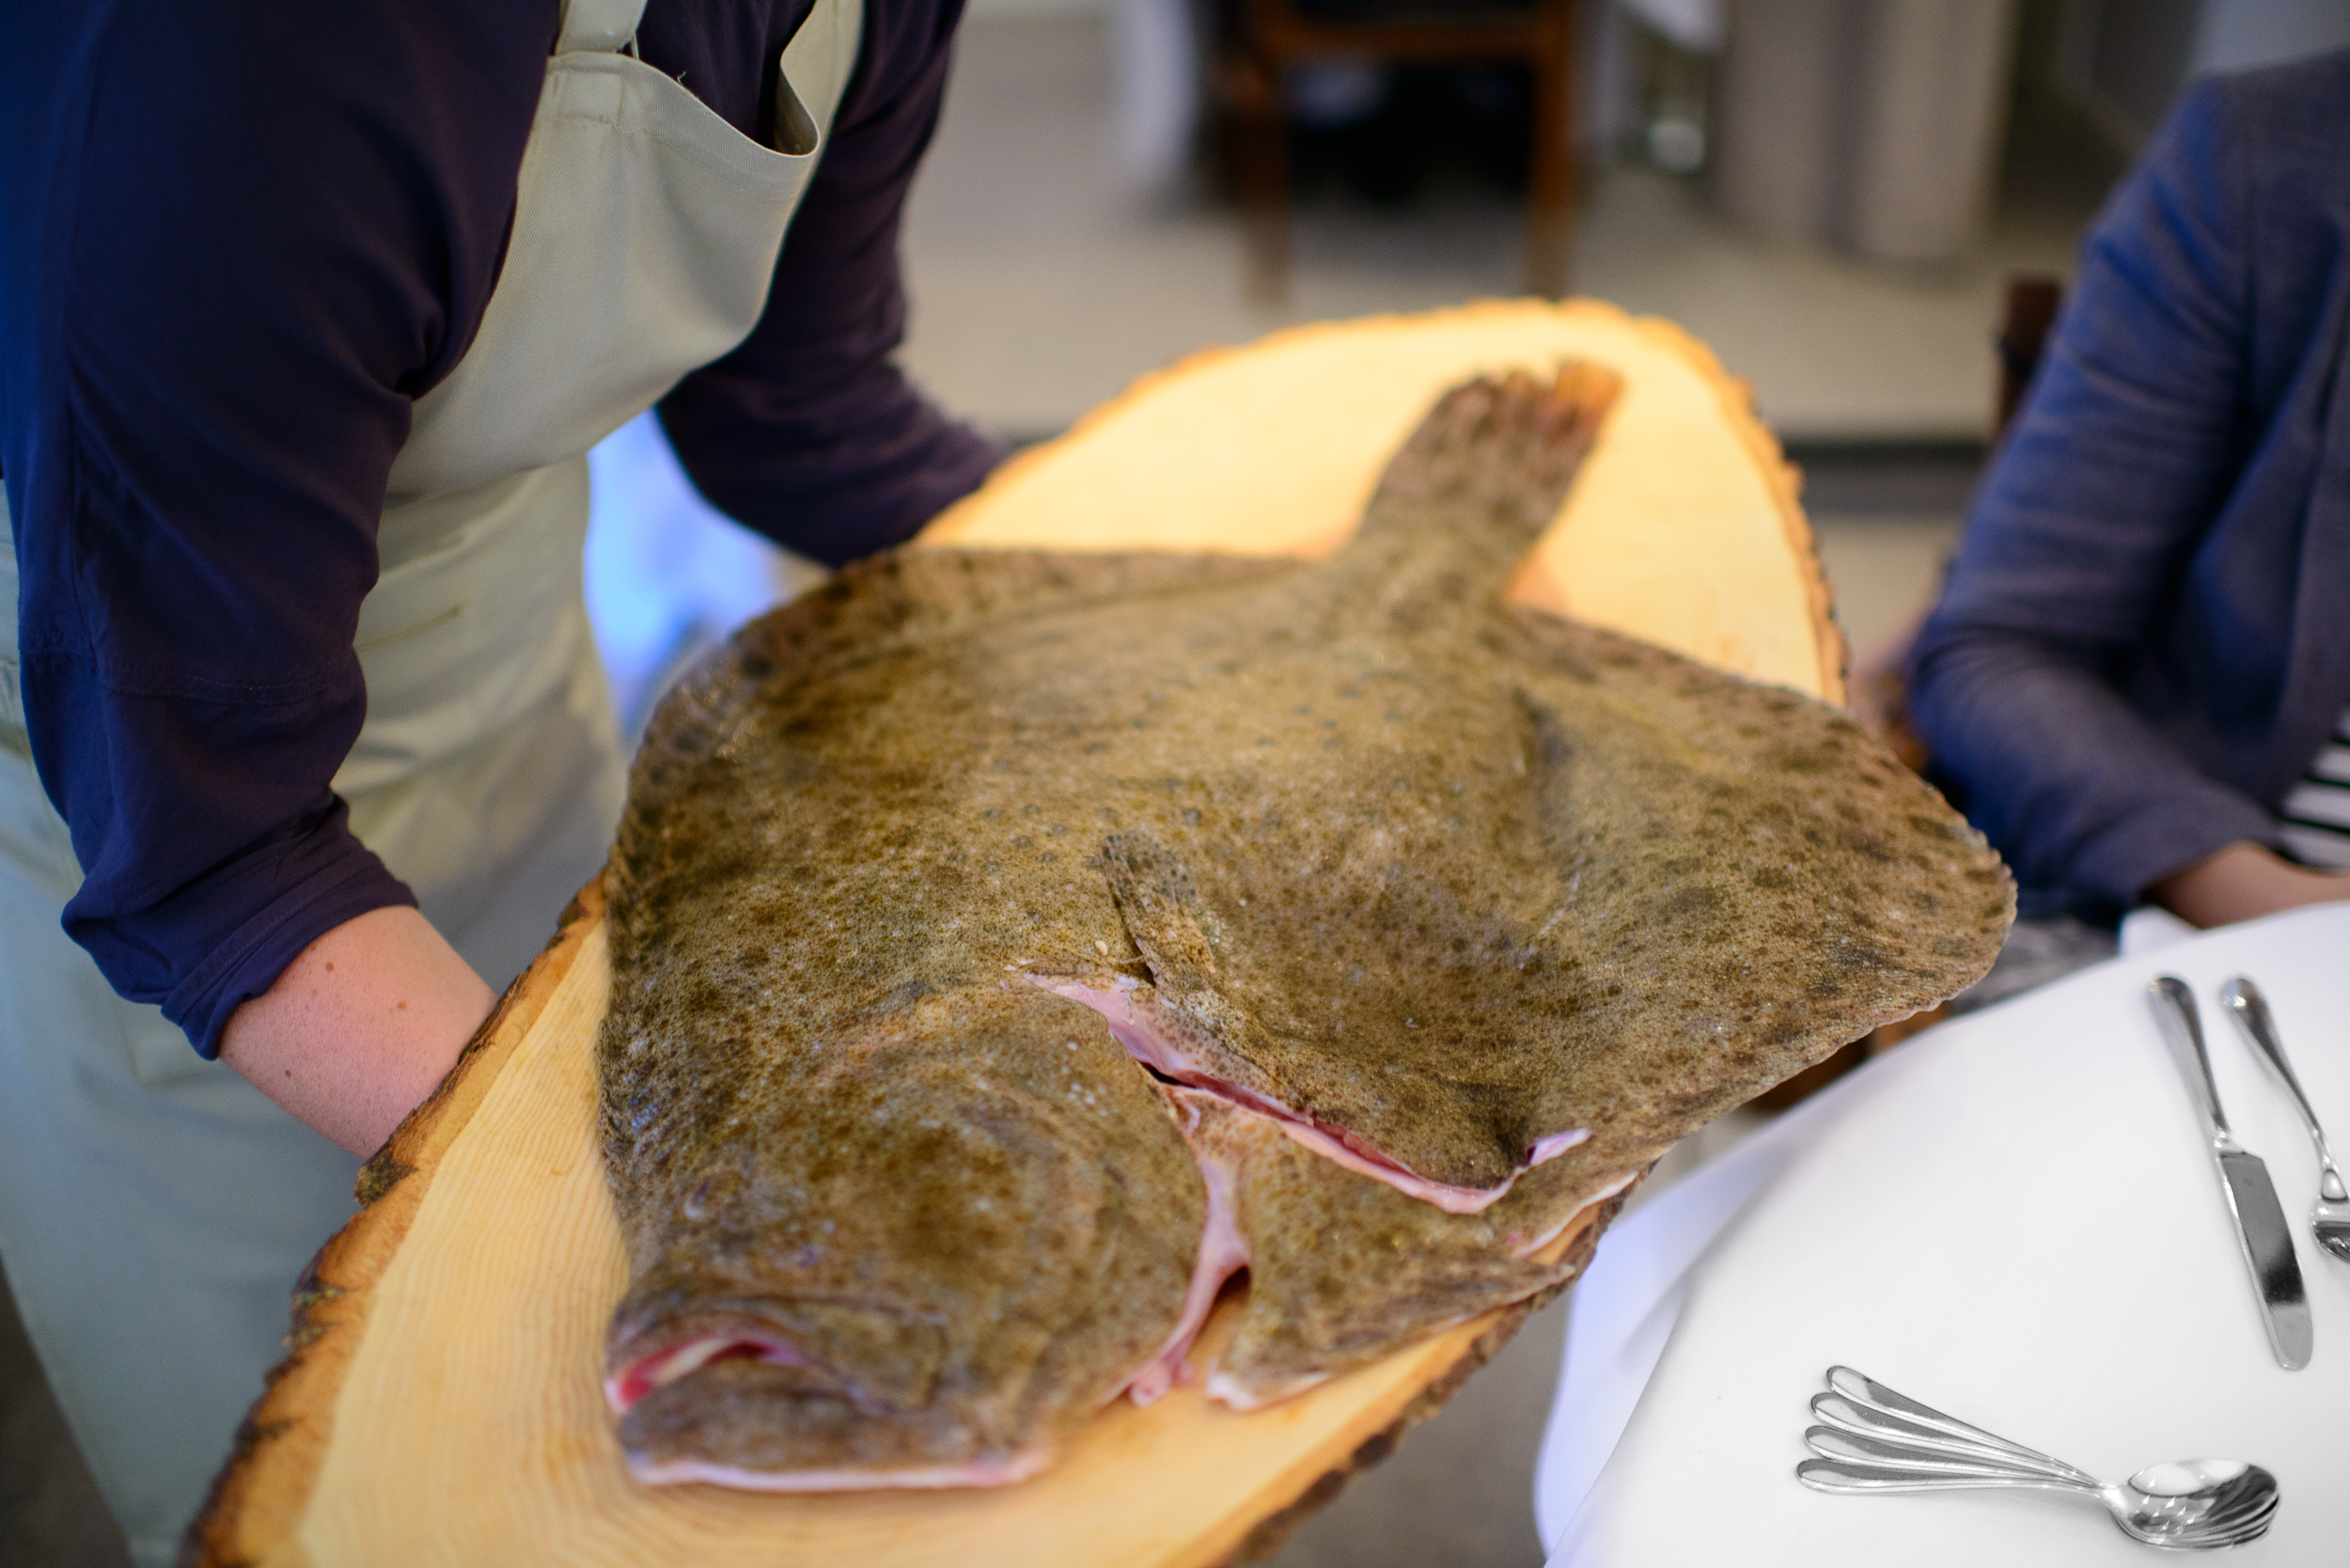 Turbot, baked whole for 4 hours